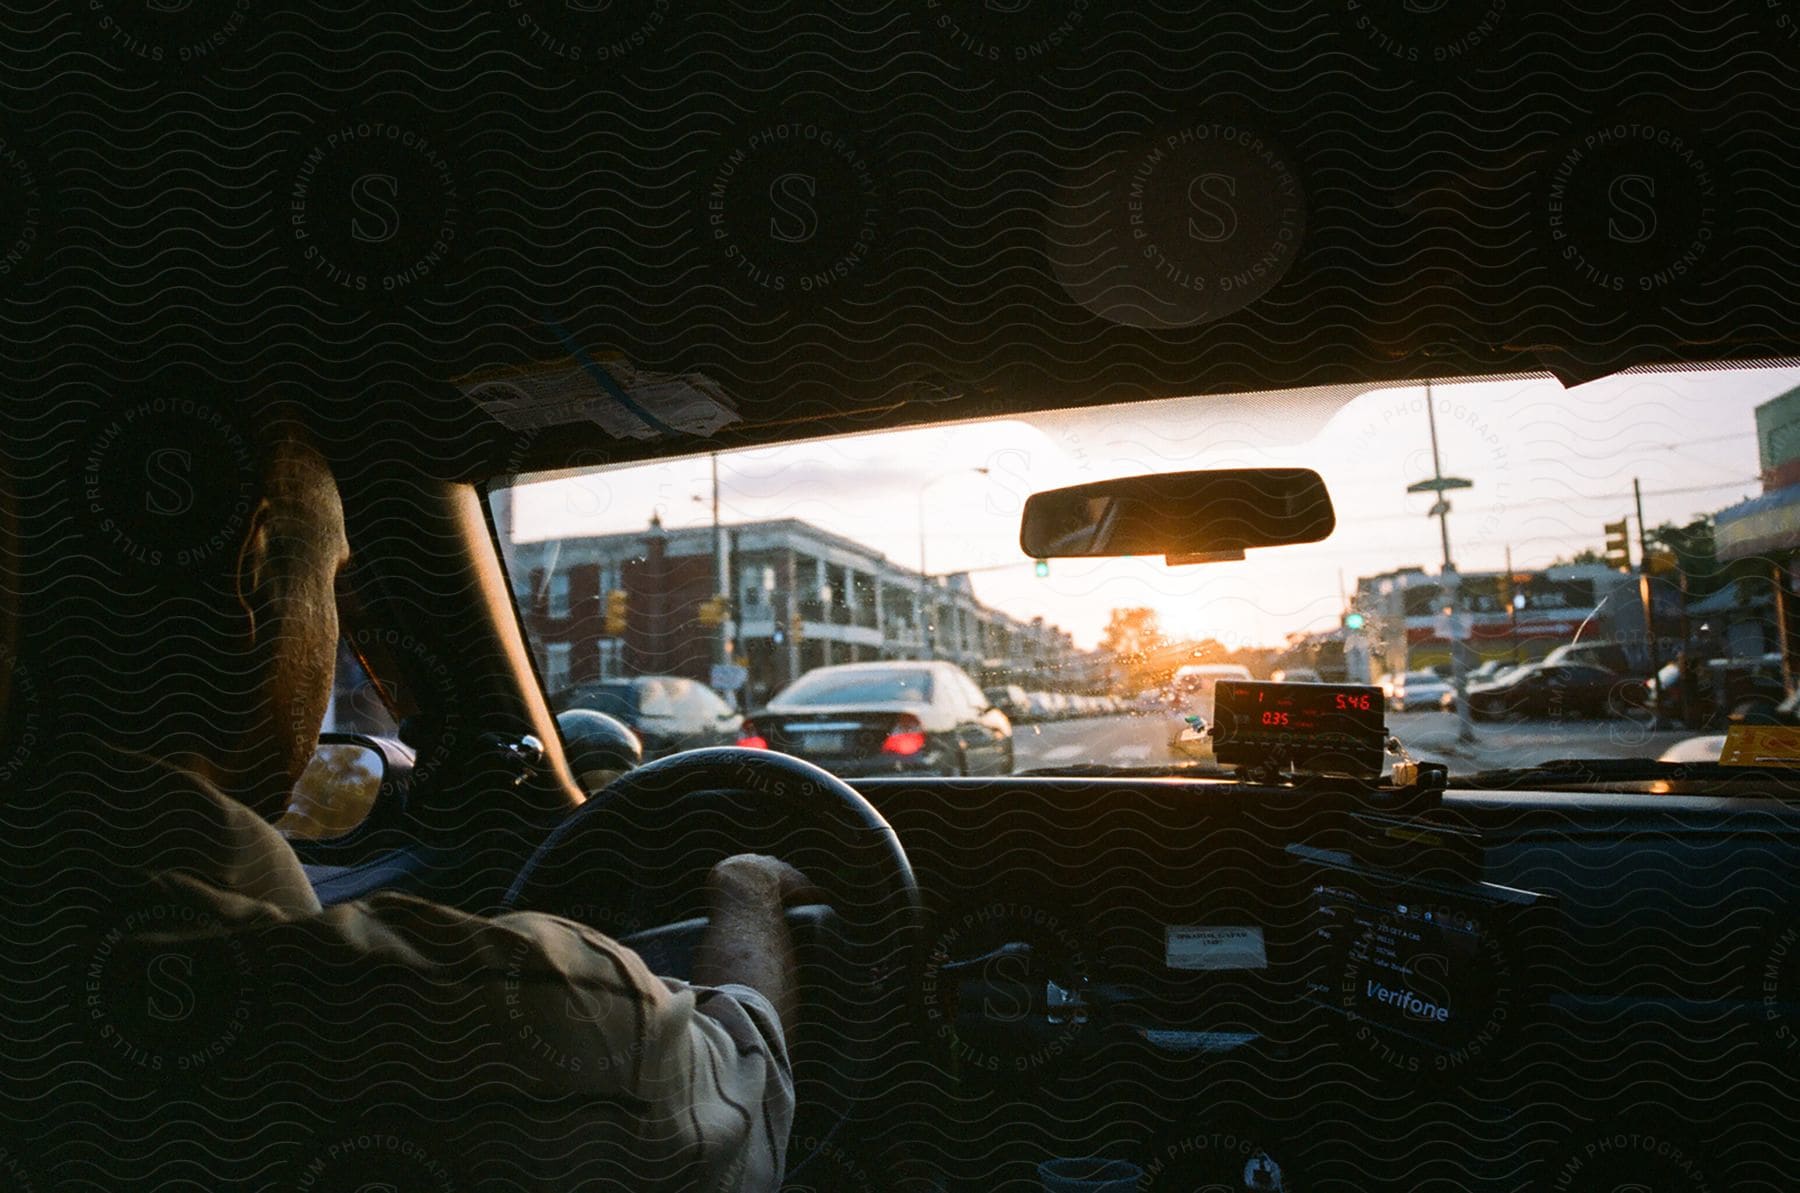 The interior of a car at sunset. The driver holds the steering wheel, and the golden light of the sun illuminates the room, creating a warm and cozy atmosphere.